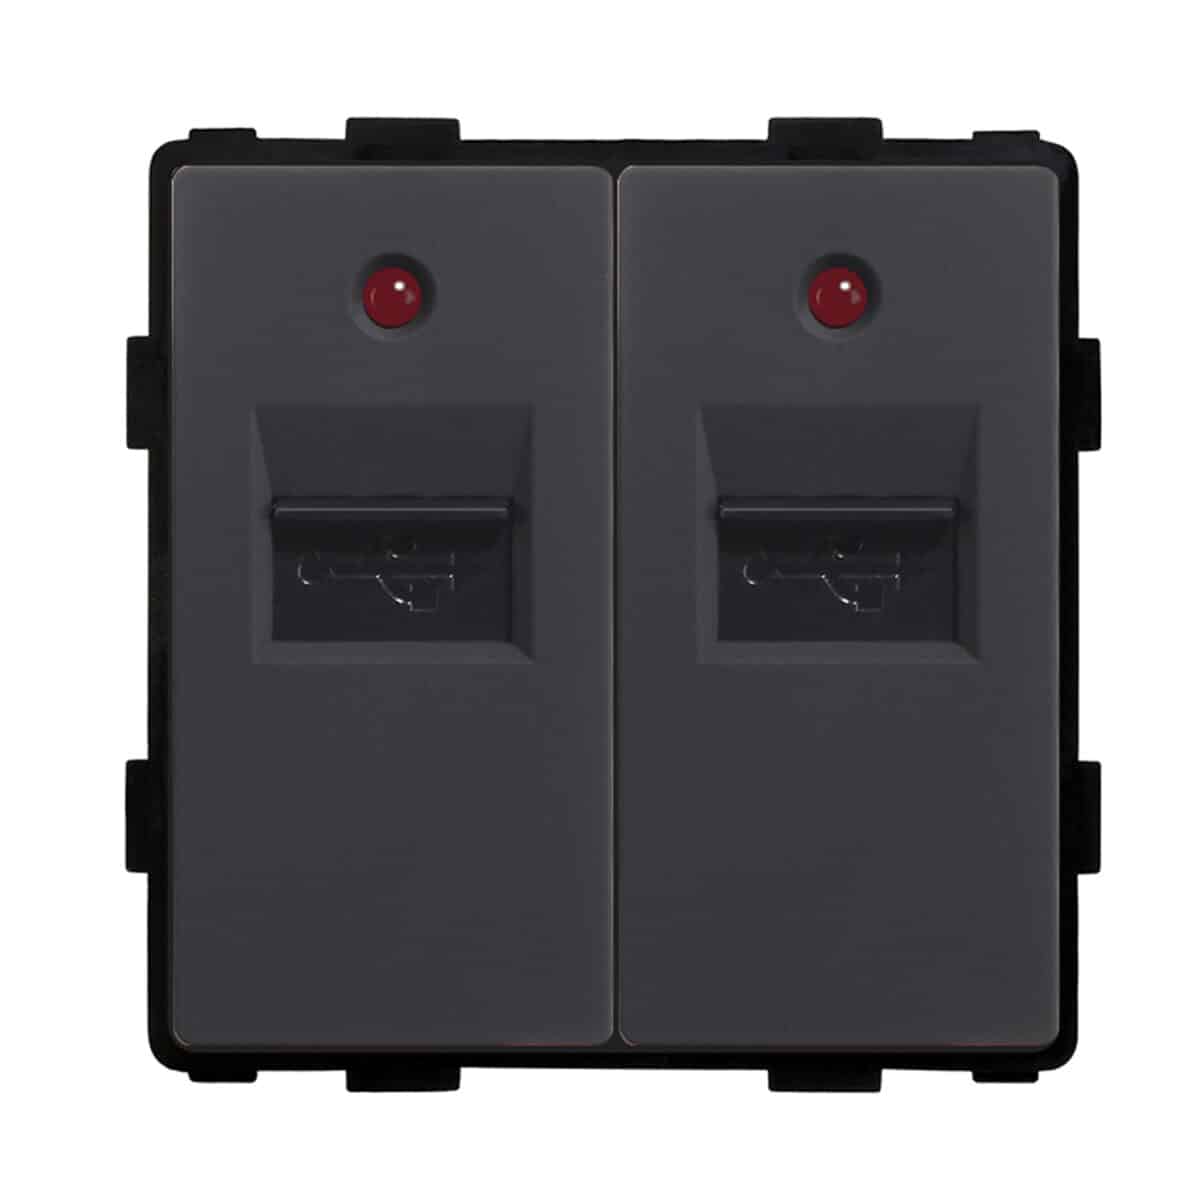 Bseed-eu-uk-russia-standard-socket-panel-button-switch-with-crystal-glass-frame-black-diy-home